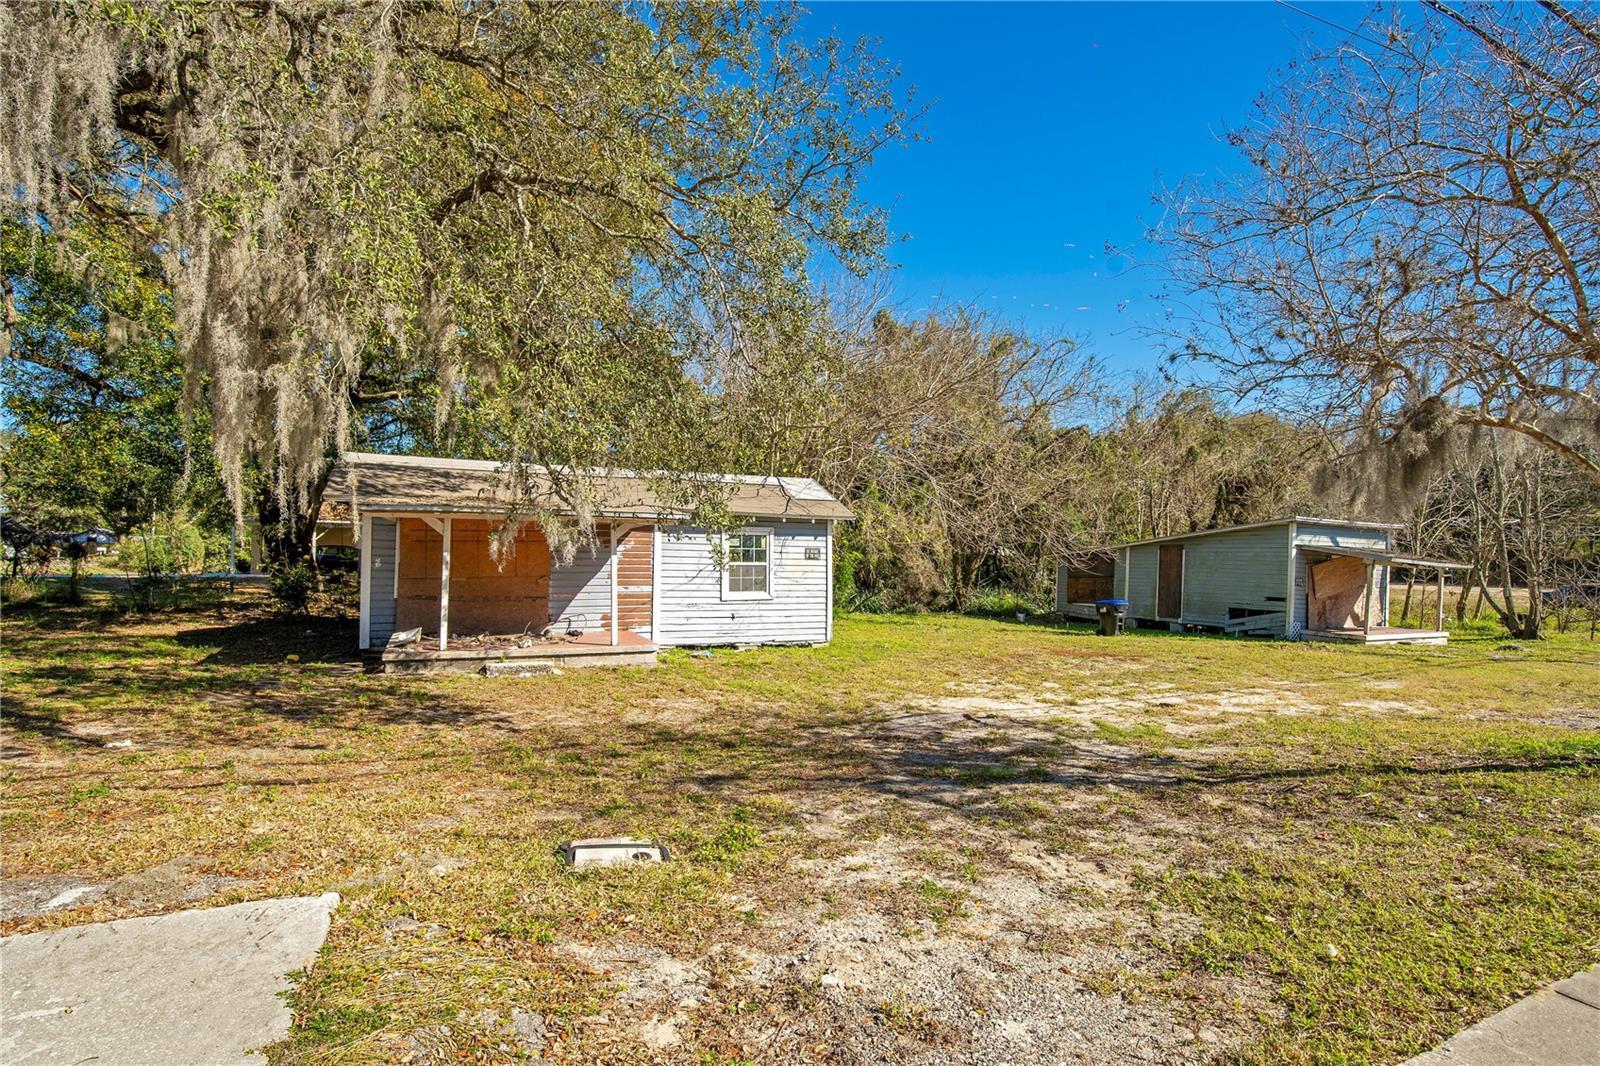 Photo one of 1303 S Central Ave Apopka FL 32703 | MLS O6179155